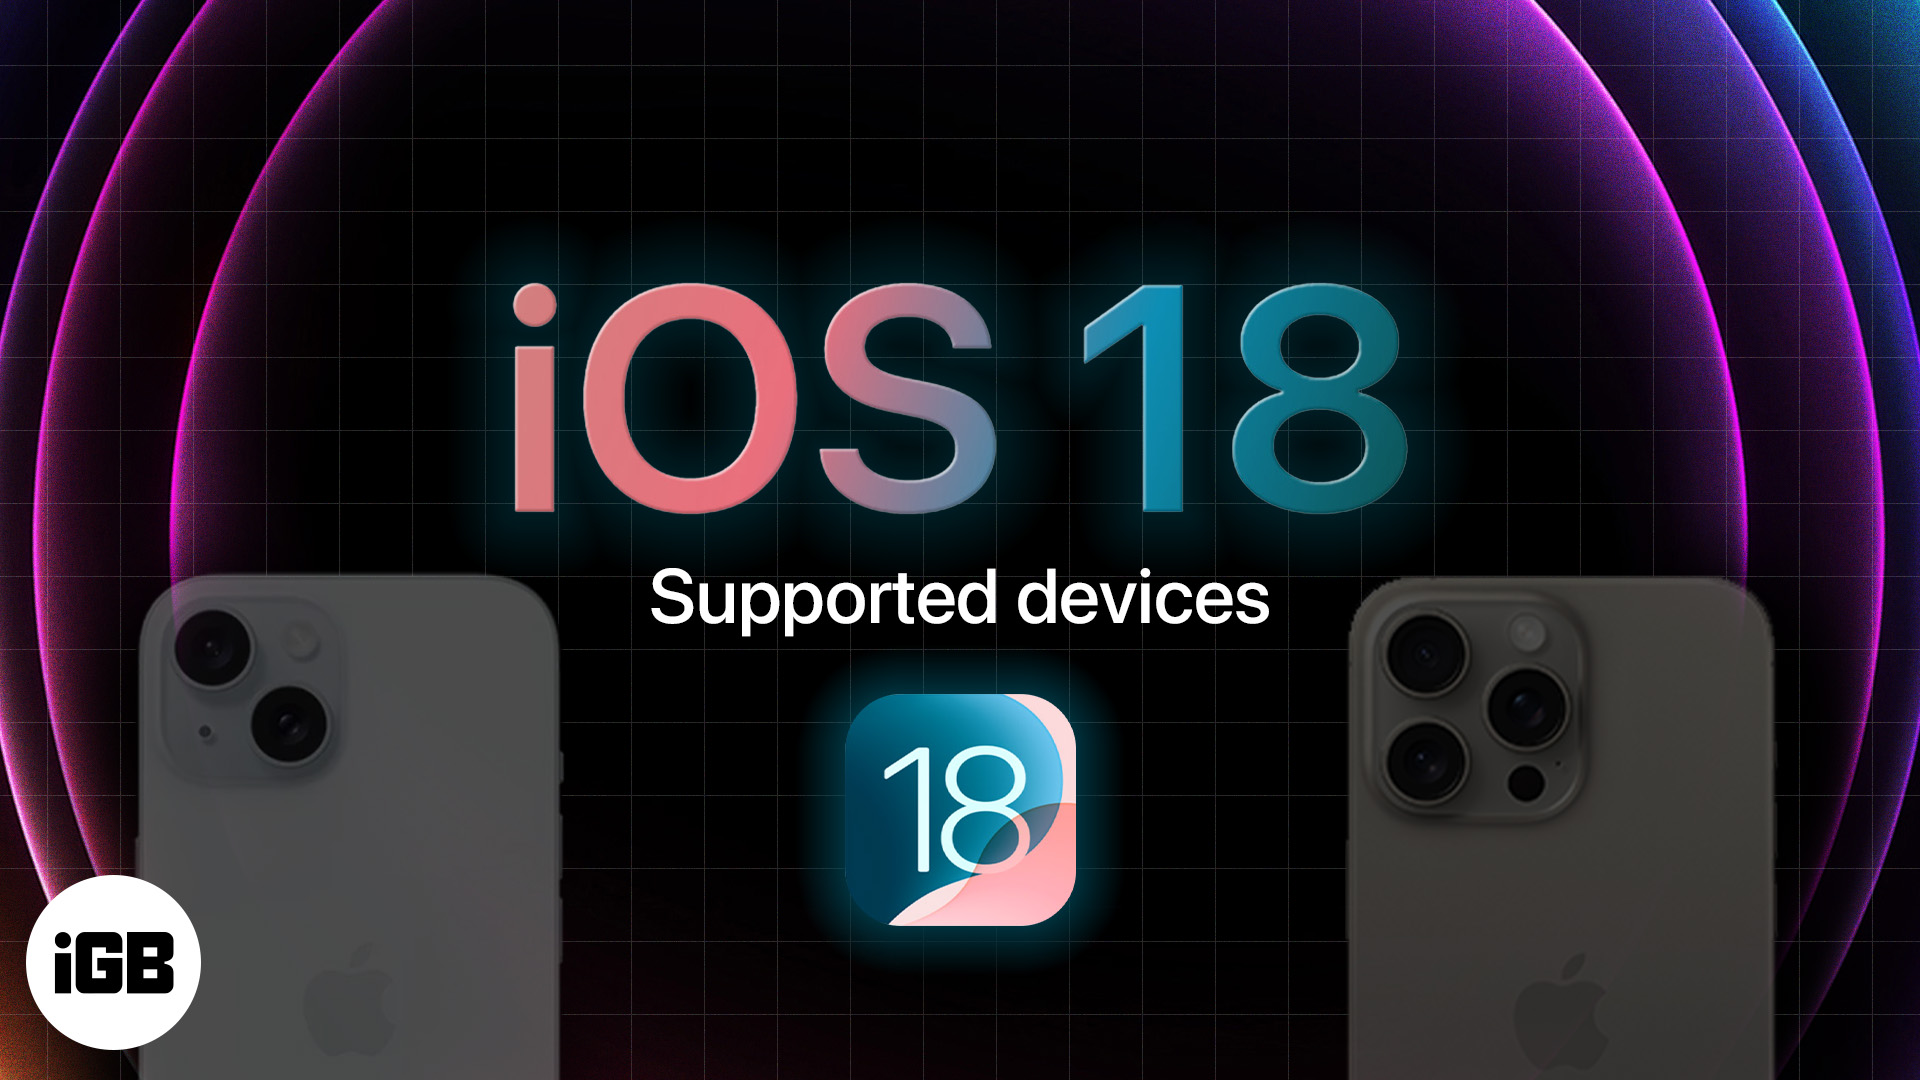 iOS 18 supported devices: All compatible iPhone models